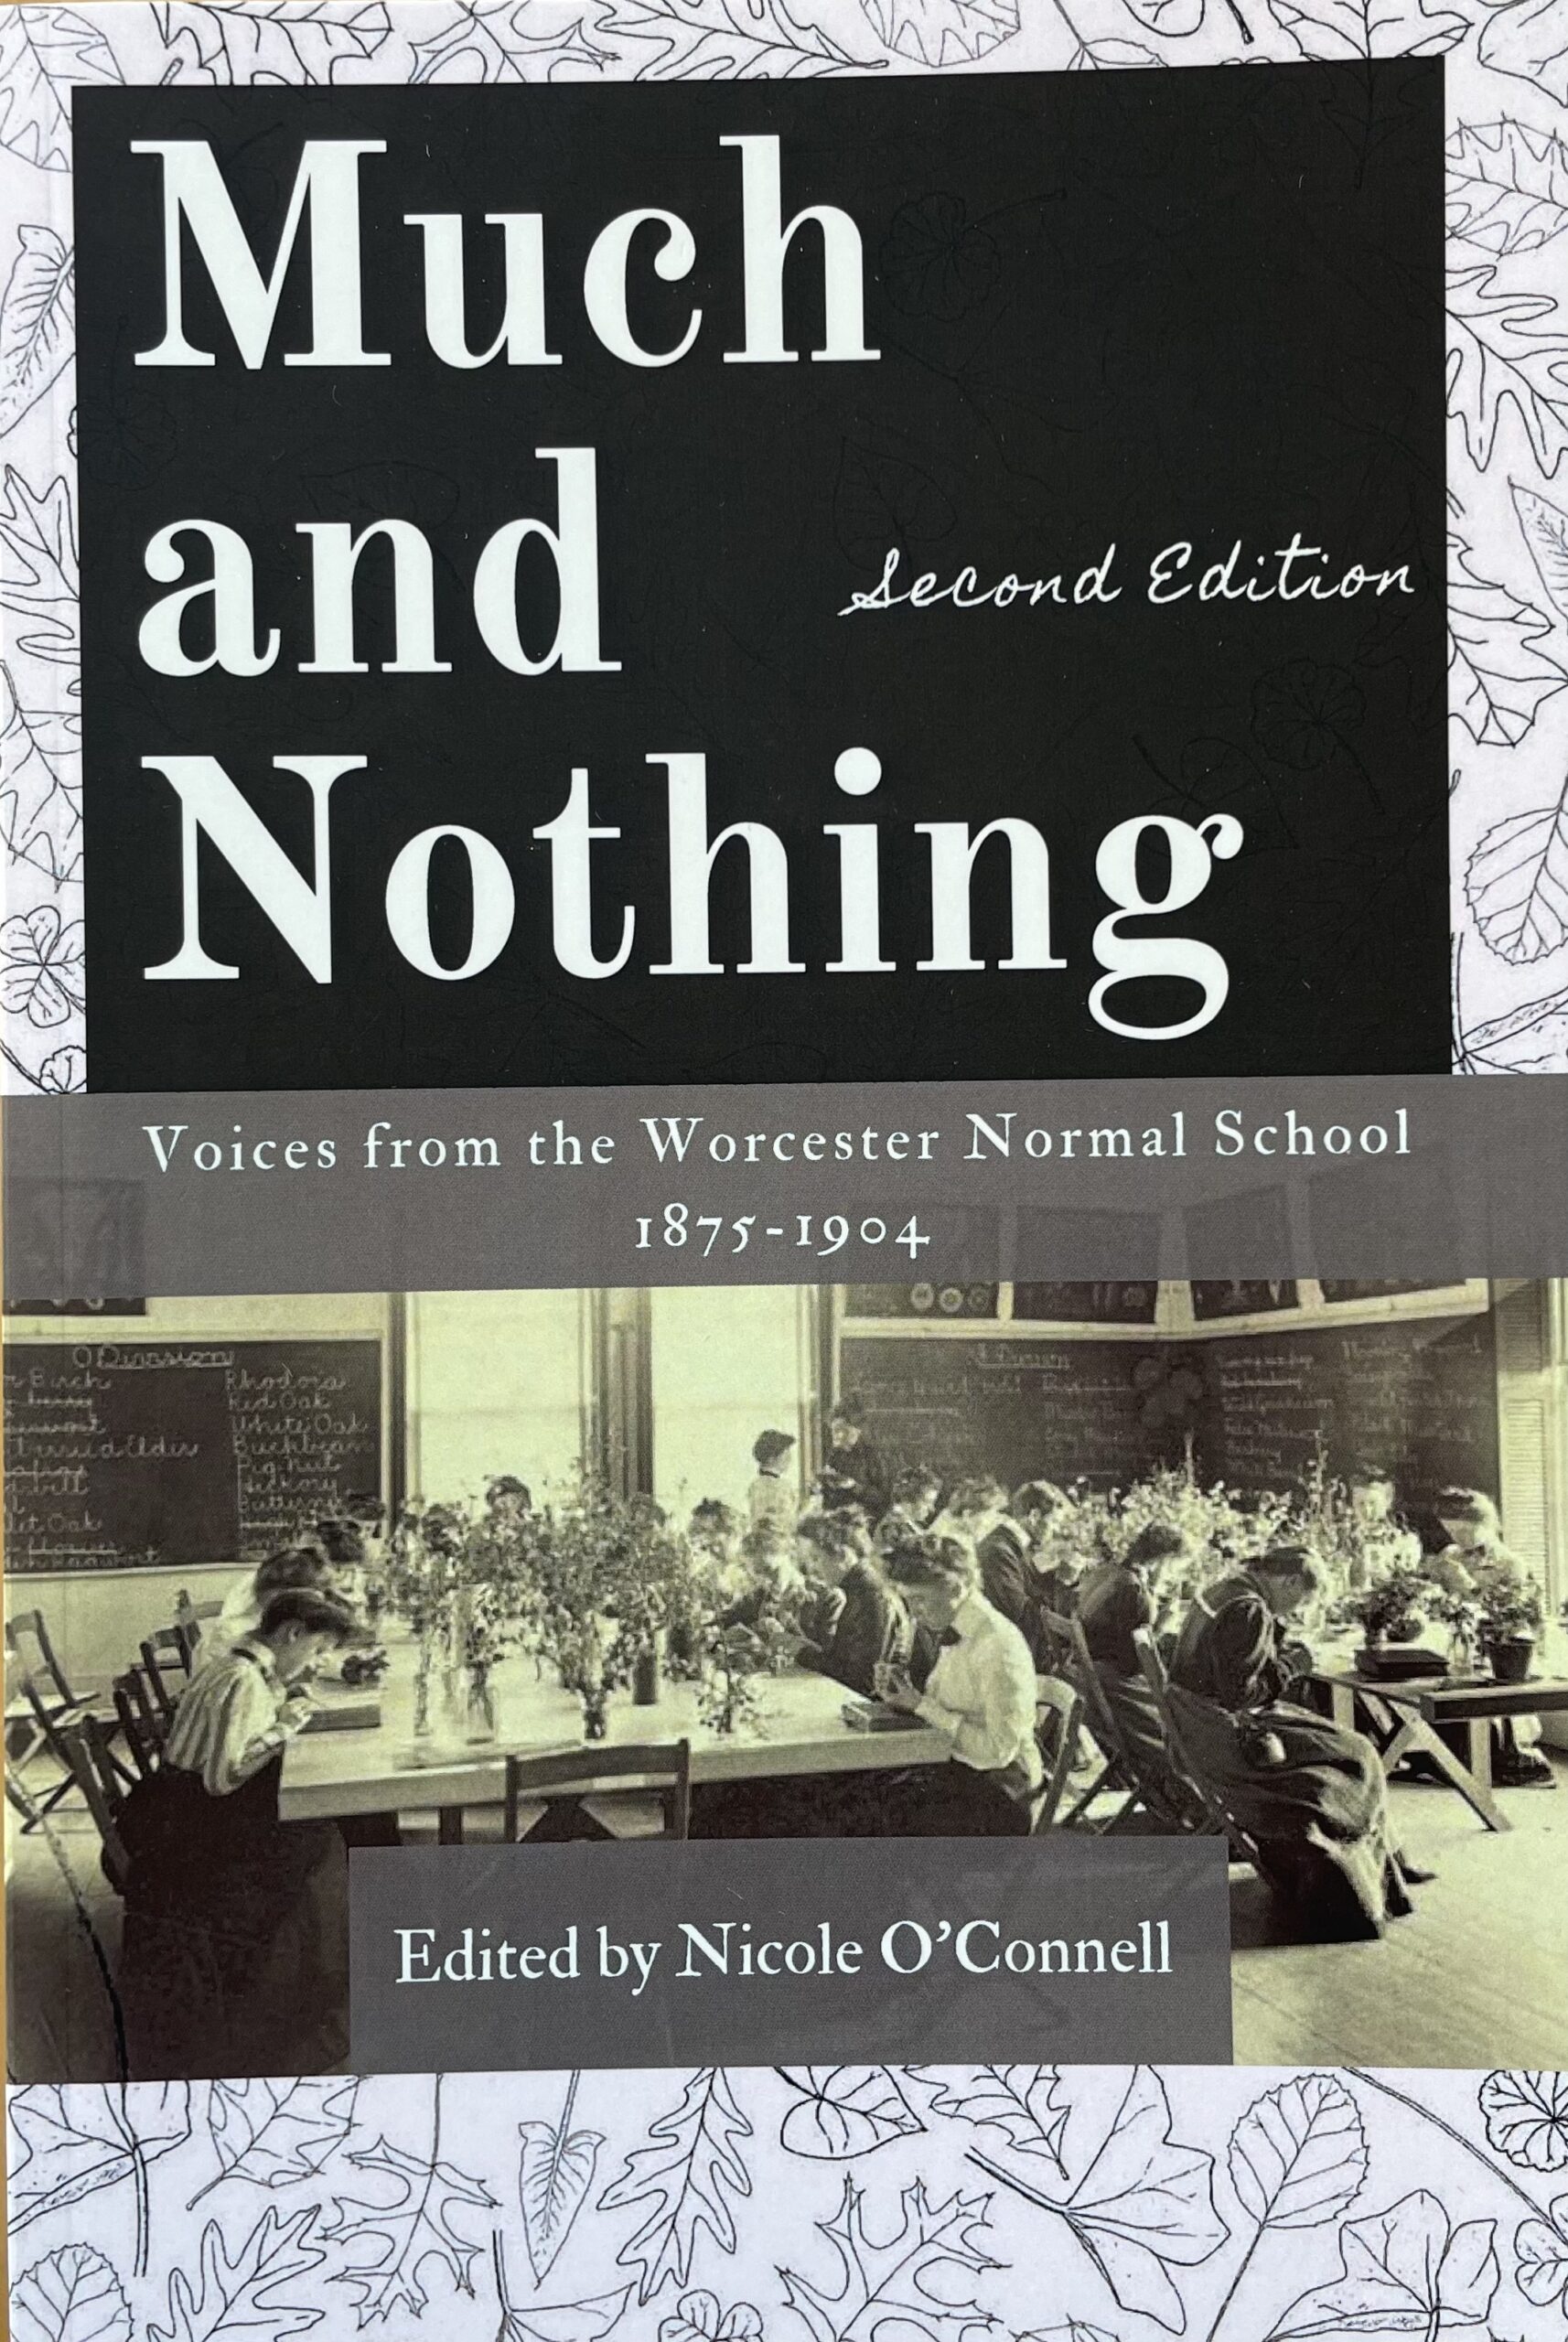 Cover of the book Much and Nothing, featuring an old photo of Worcester Normal School students